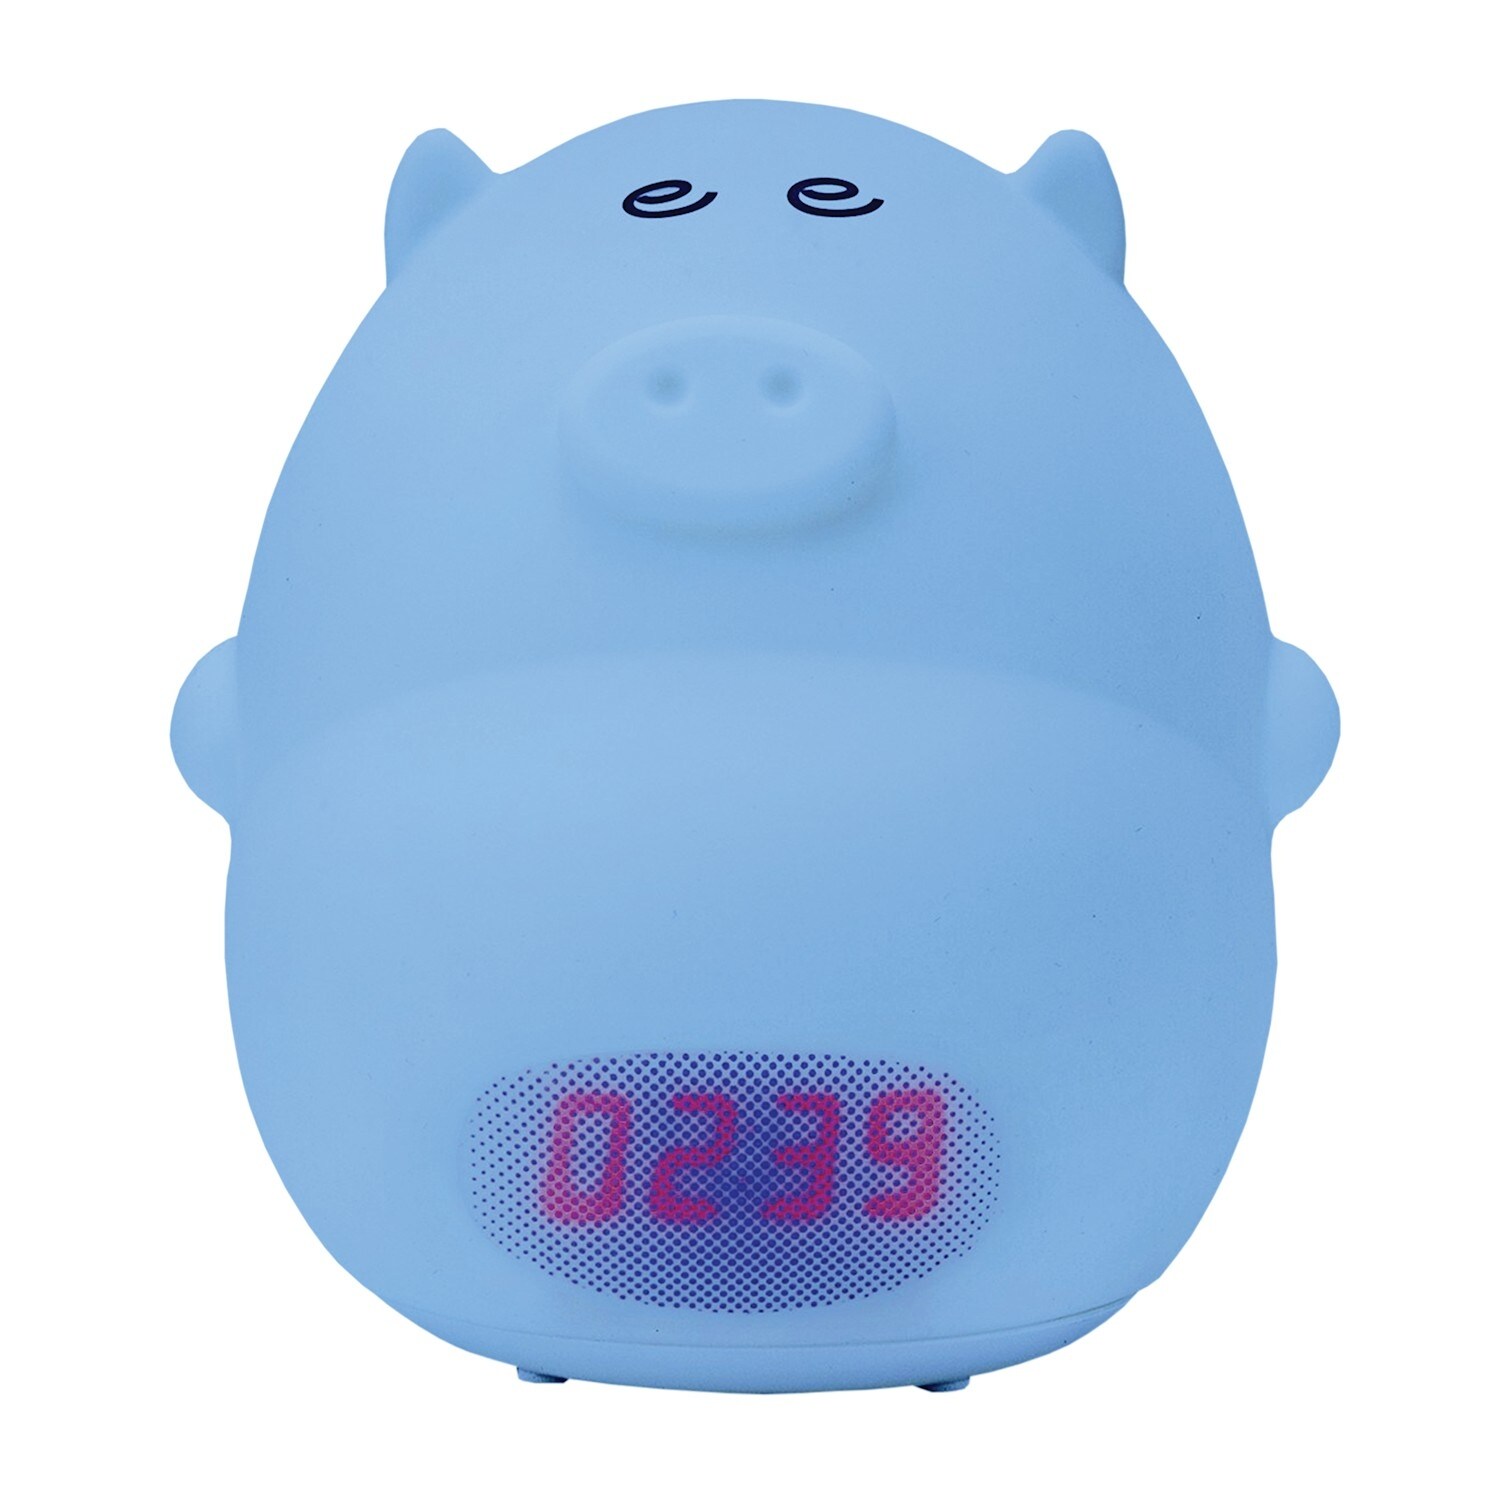 17cm GRUNTING PIG LED EYES MOTION ACTIVATED SENSOR FUN GIFT & SECURITY ALARM 